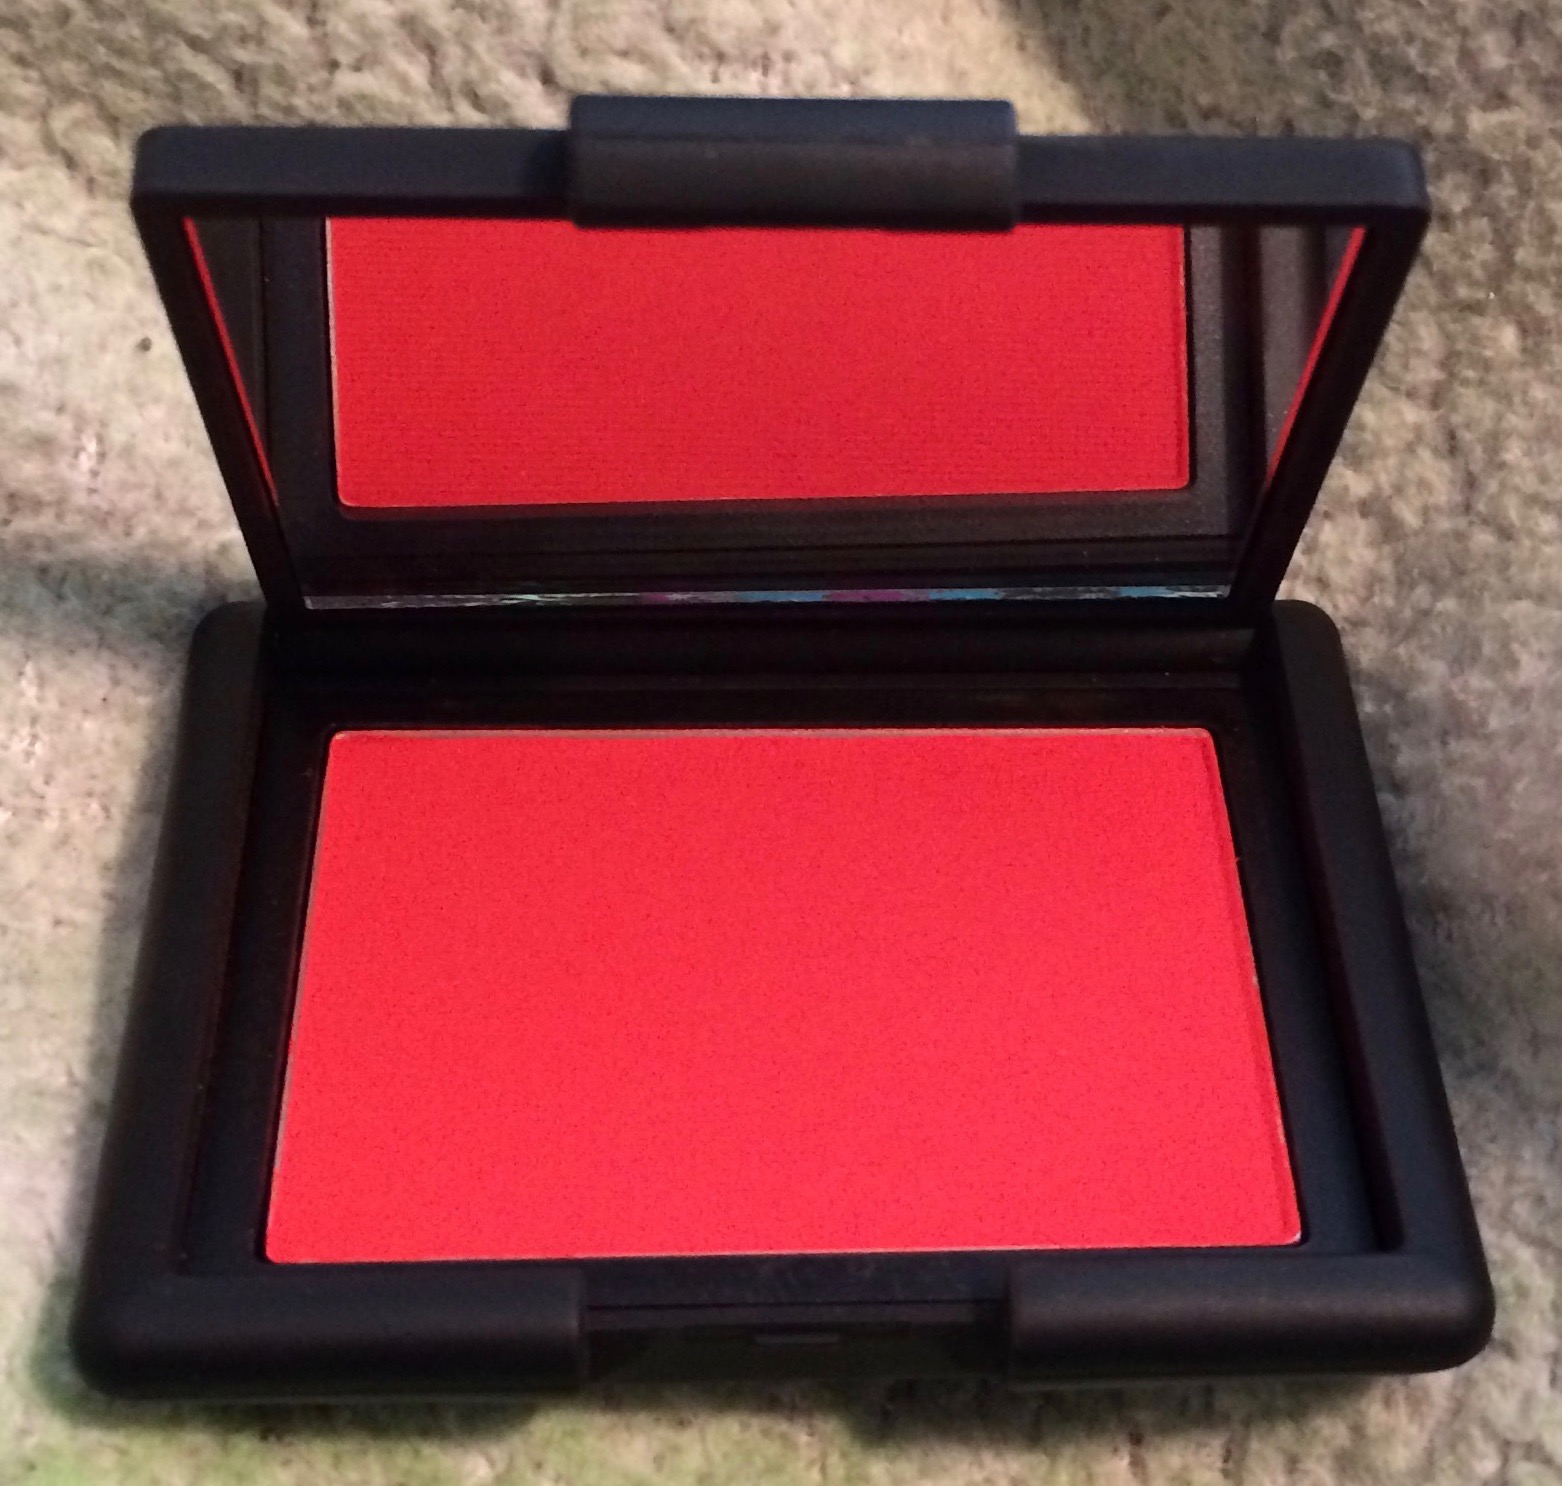 NARS Exhibit A Powder Blush Review & Swatches